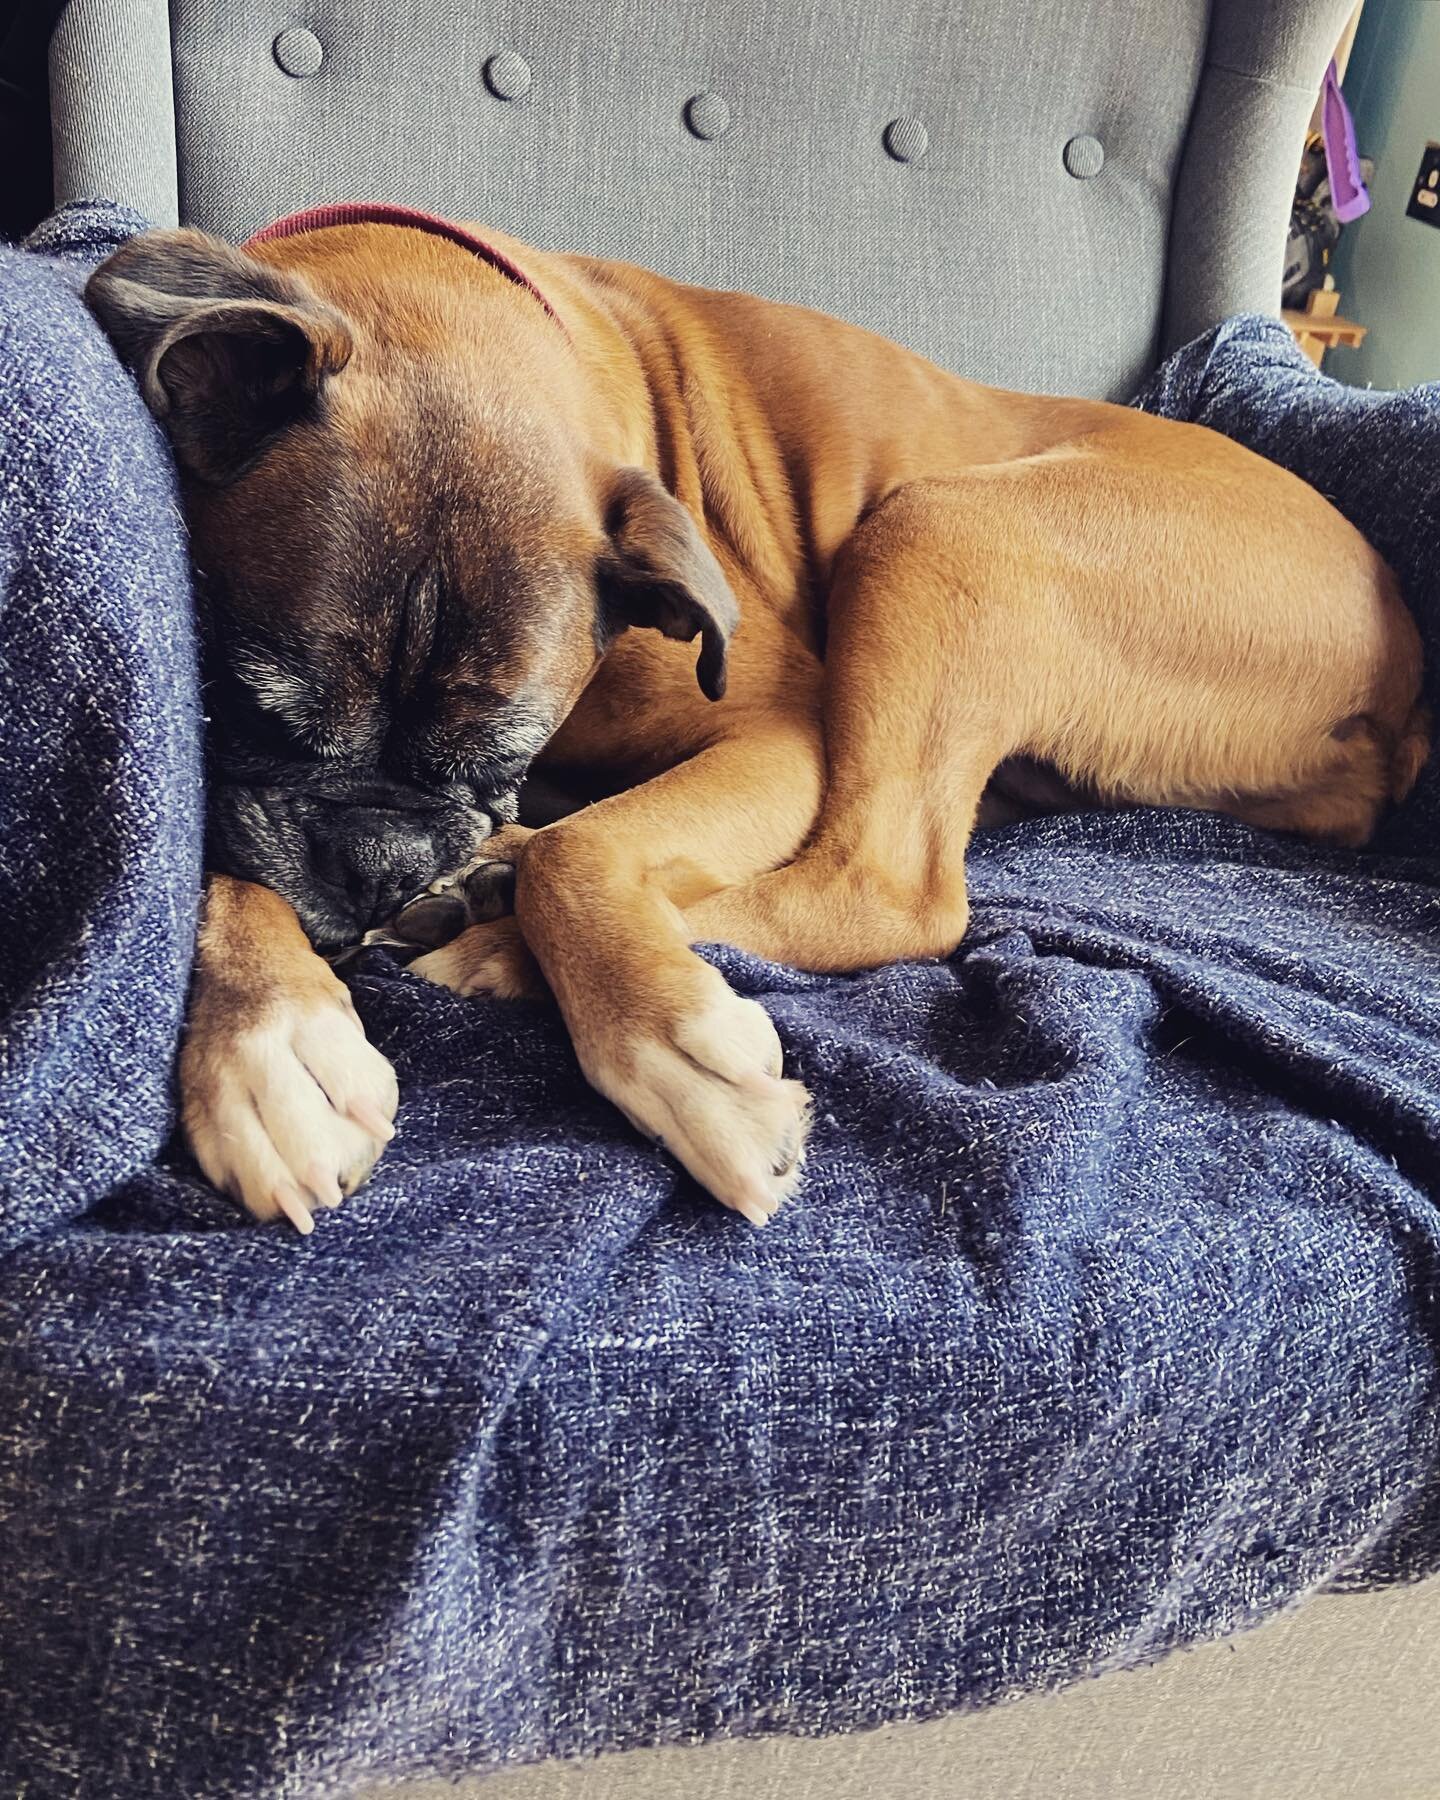 Nice nap after her walk 😂🧡